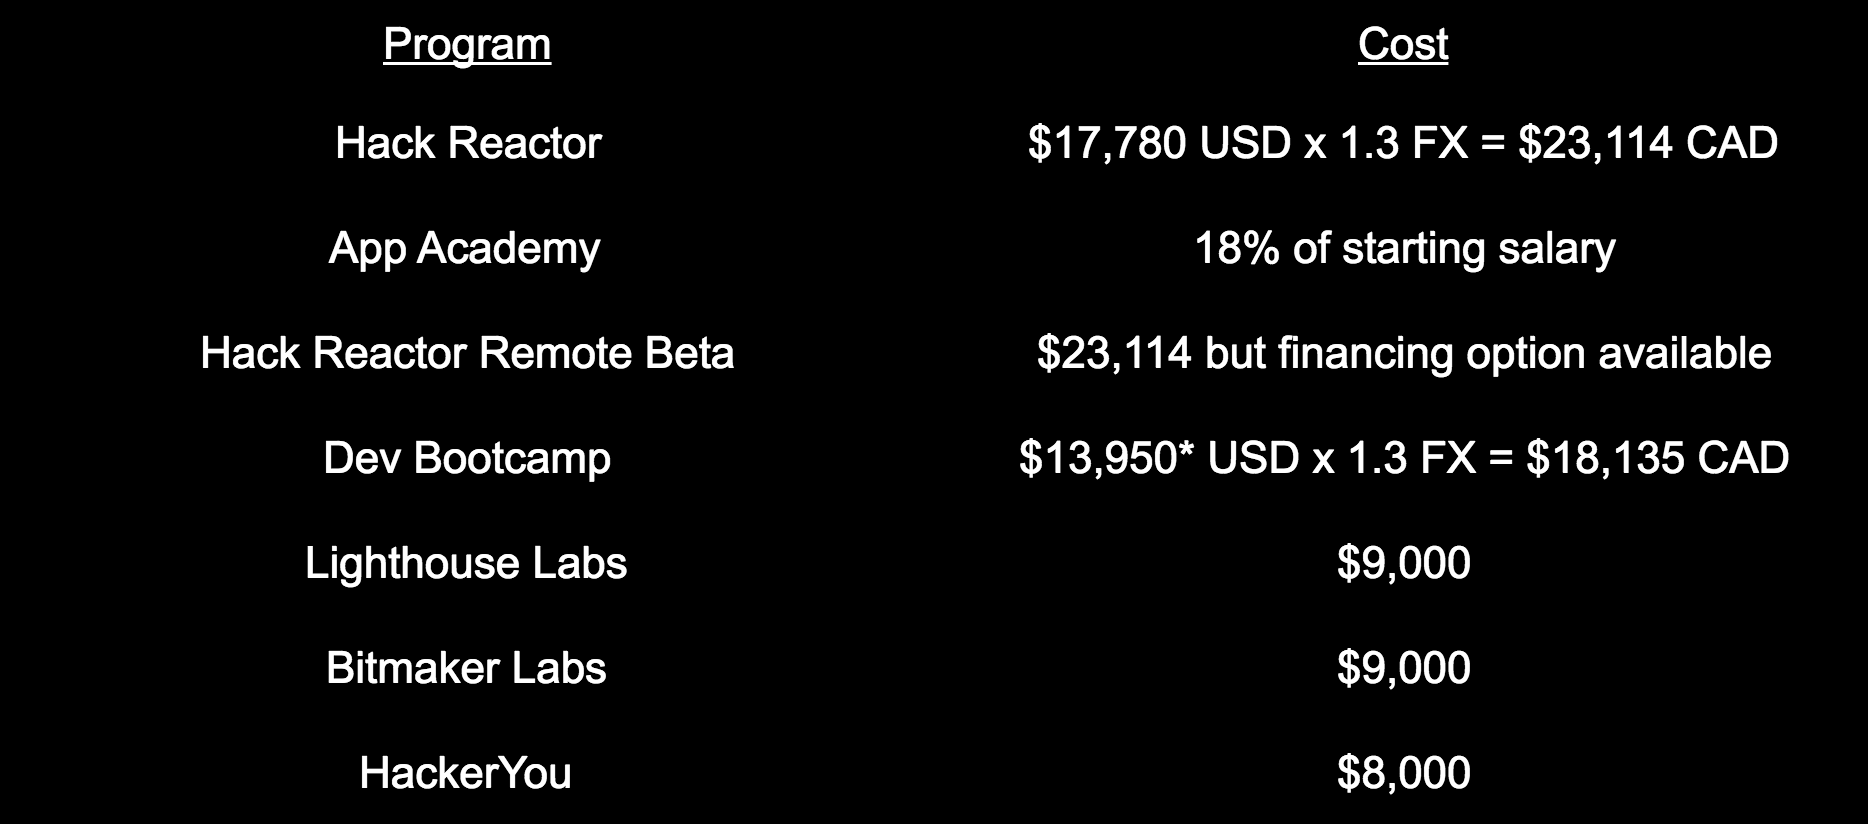 Hack Reactor: $17,780 USD x 1.3 FX = $23,114 CAD, App Academy: 18% of starting salary (this could very well come out to be the same as HR), Hack Reactor Remote Beta: Financing option available, Dev Bootcamp: $13,950* USD x 1.3 FX = $18,135 CAD, Lighthouse Labs: $9,000, Bitmaker Labs: $9,000, HackerYou: $8,000